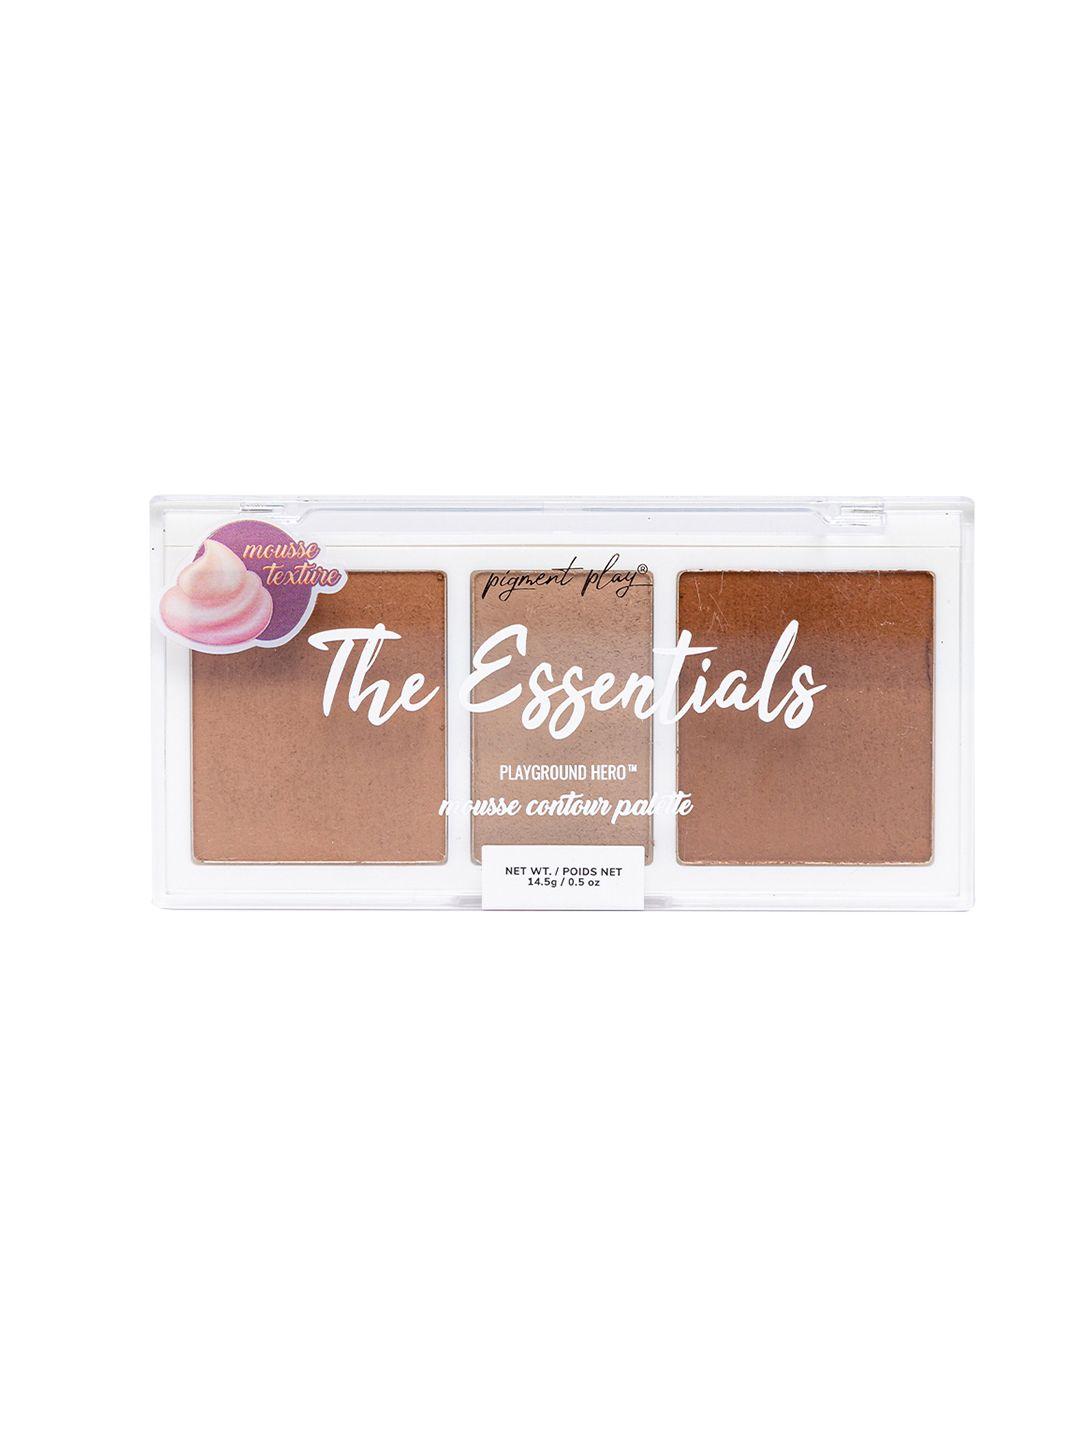 pigment-play-cruelty-free-playground-hero-mousse-contour-palette---the-essentials